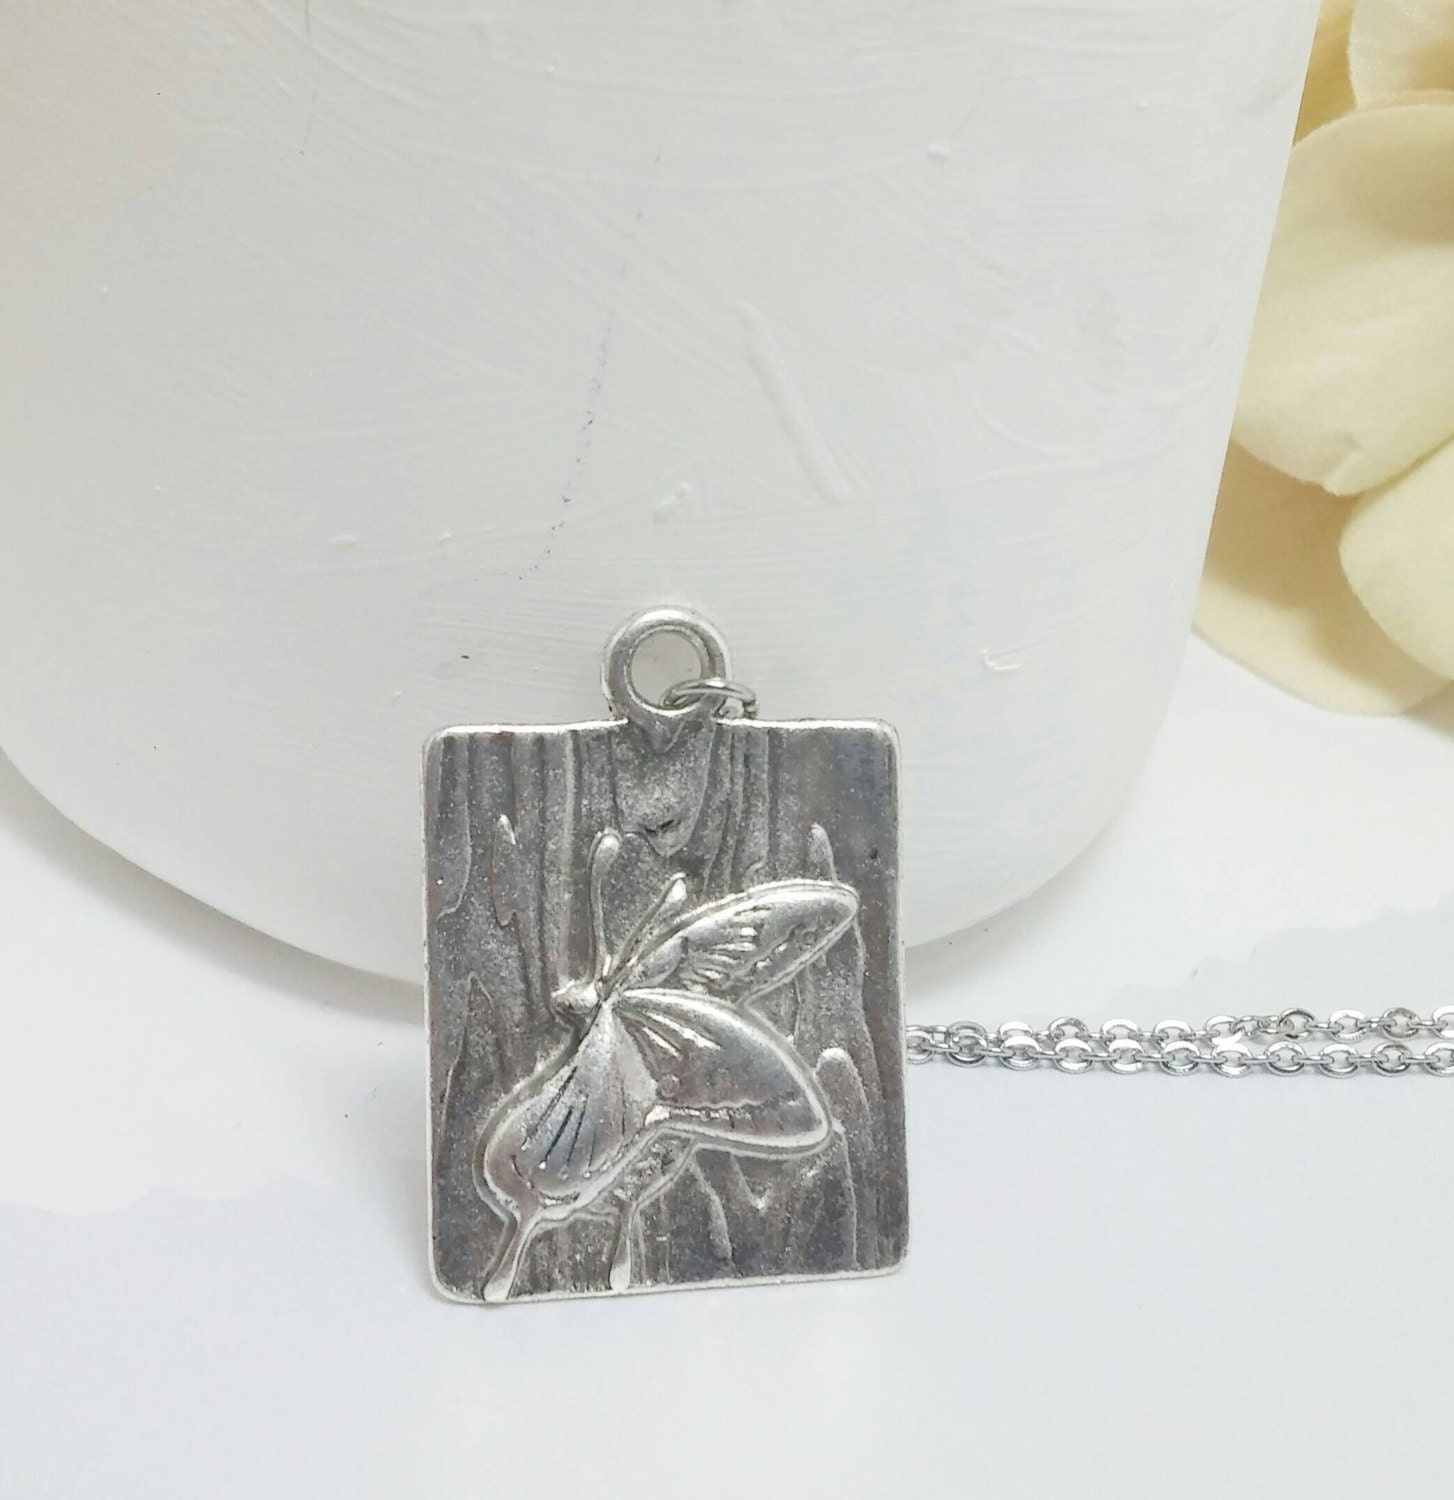 Butterfly Necklace Silver charm necklace by HappyElephantArt